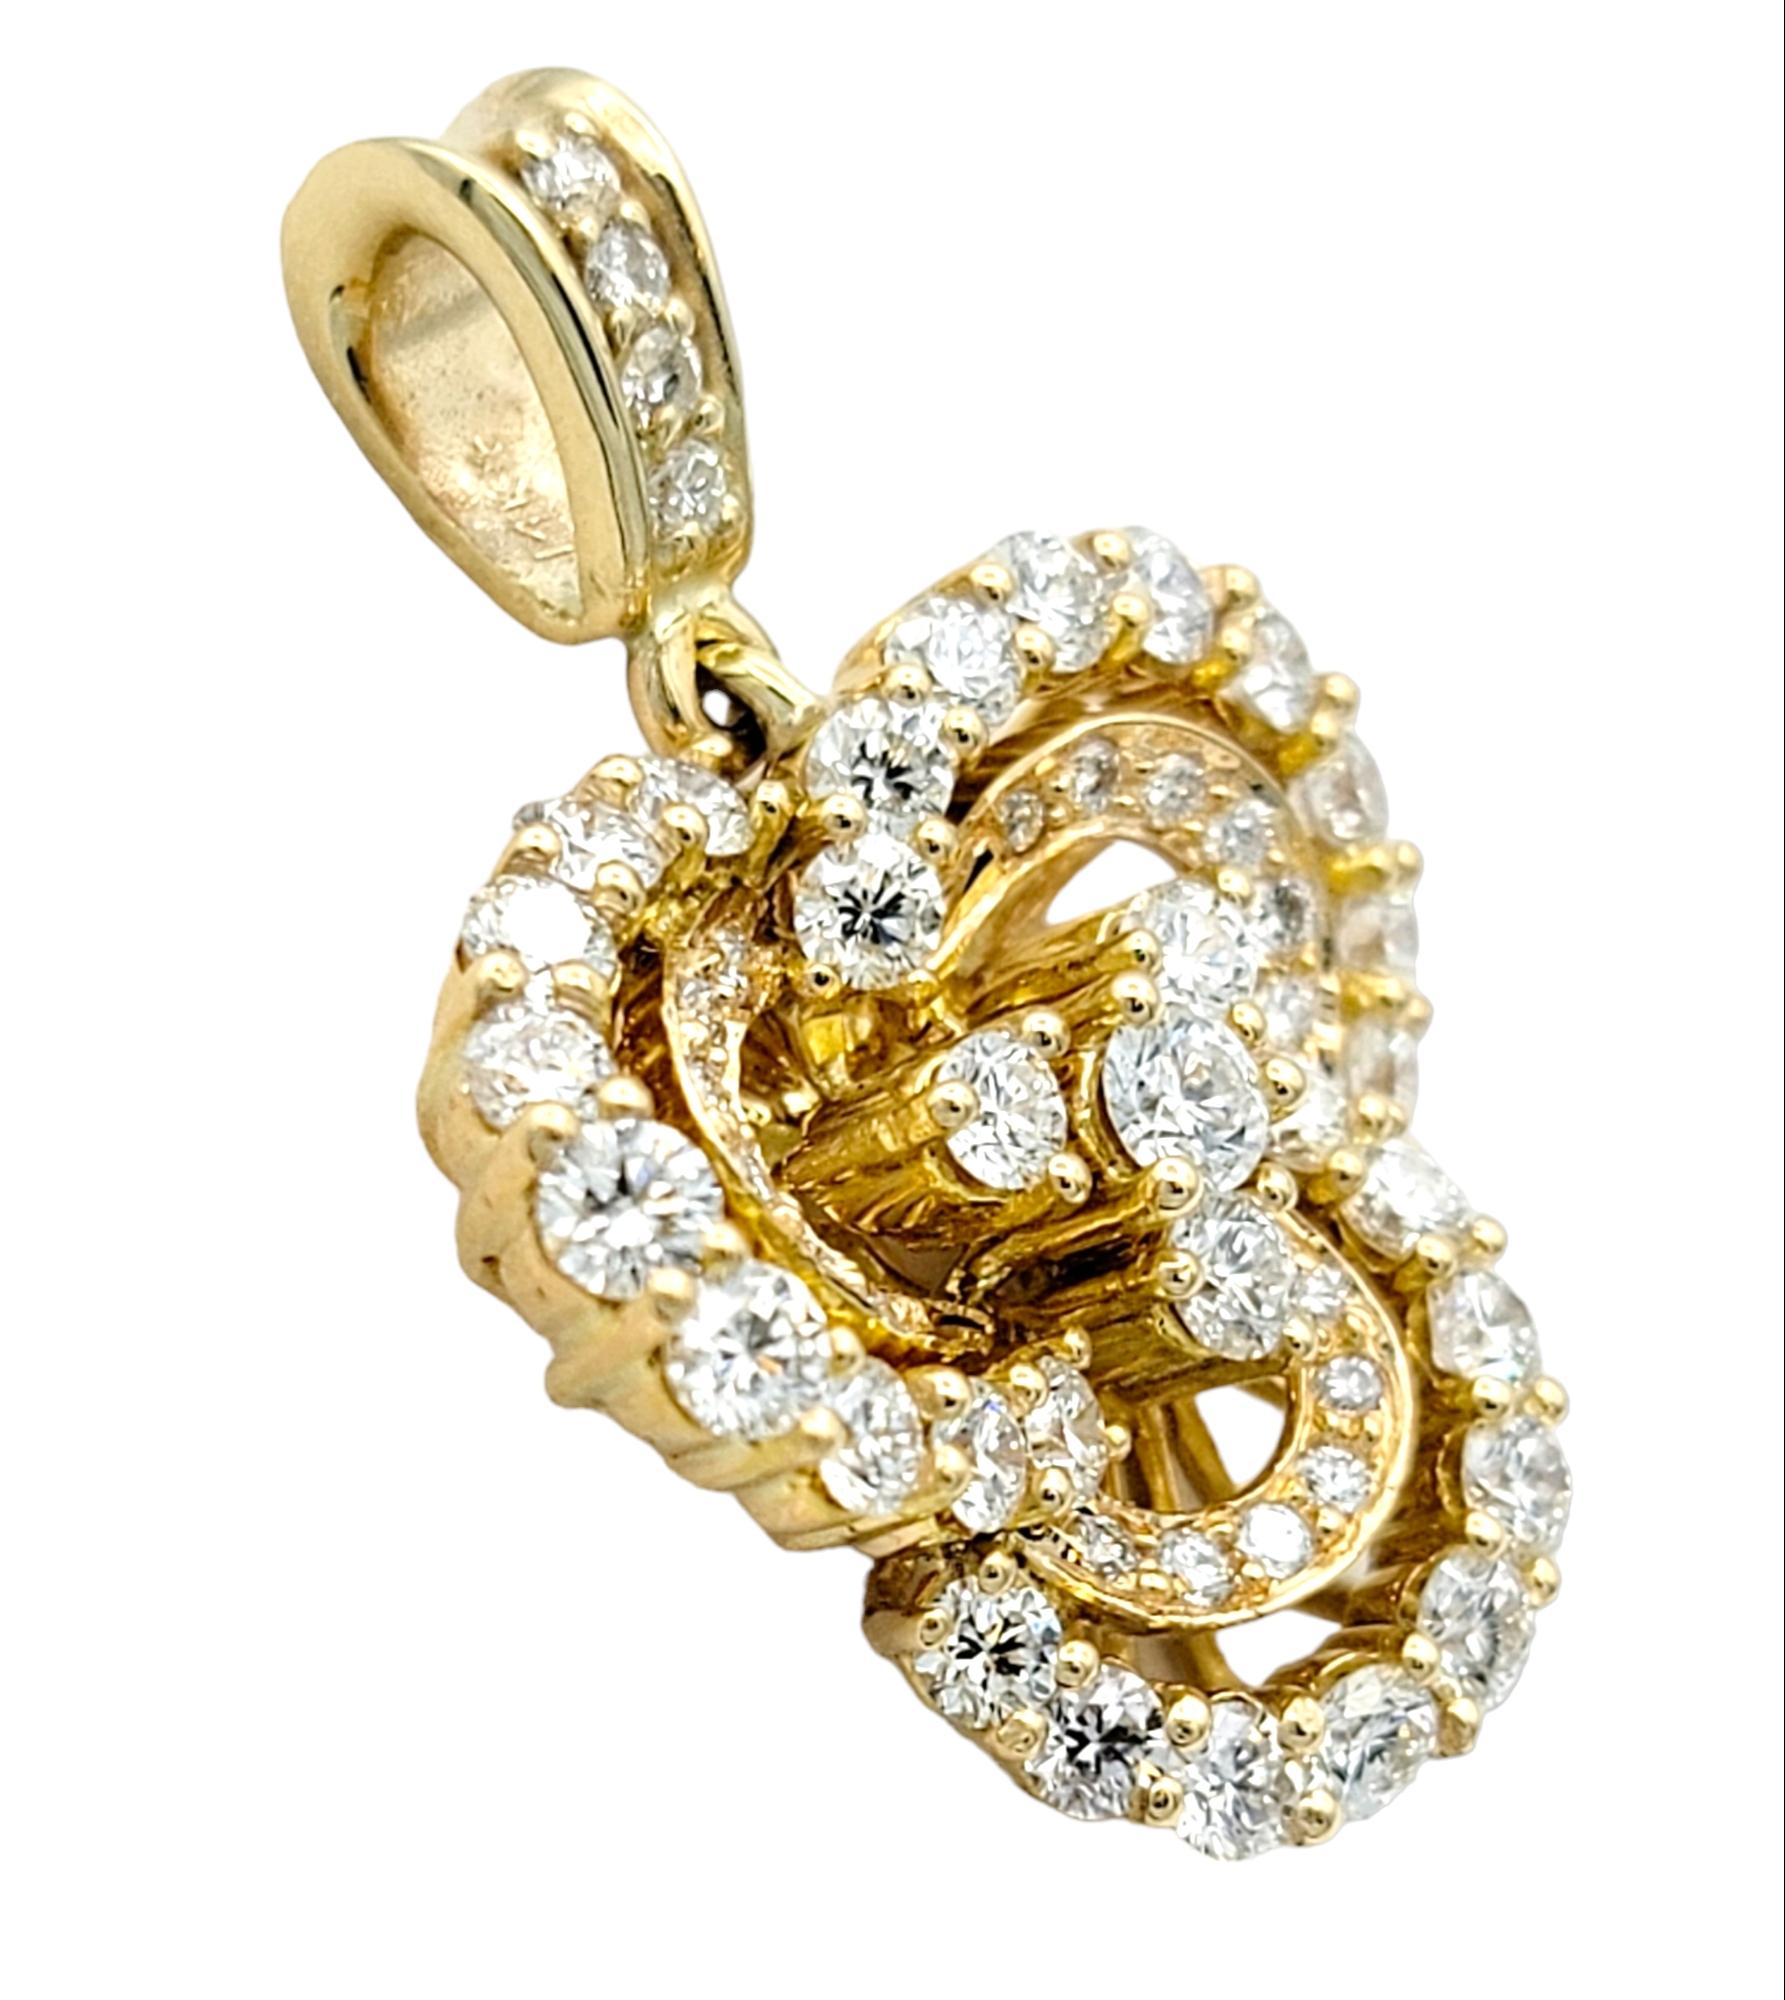 This exquisite diamond pendant, set in resplendent 14 karat yellow gold, is a captivating embodiment of nature's elegance, resembling the delicate petals of a radiant flower. The pendant features three gracefully curving loops, each adorned with a